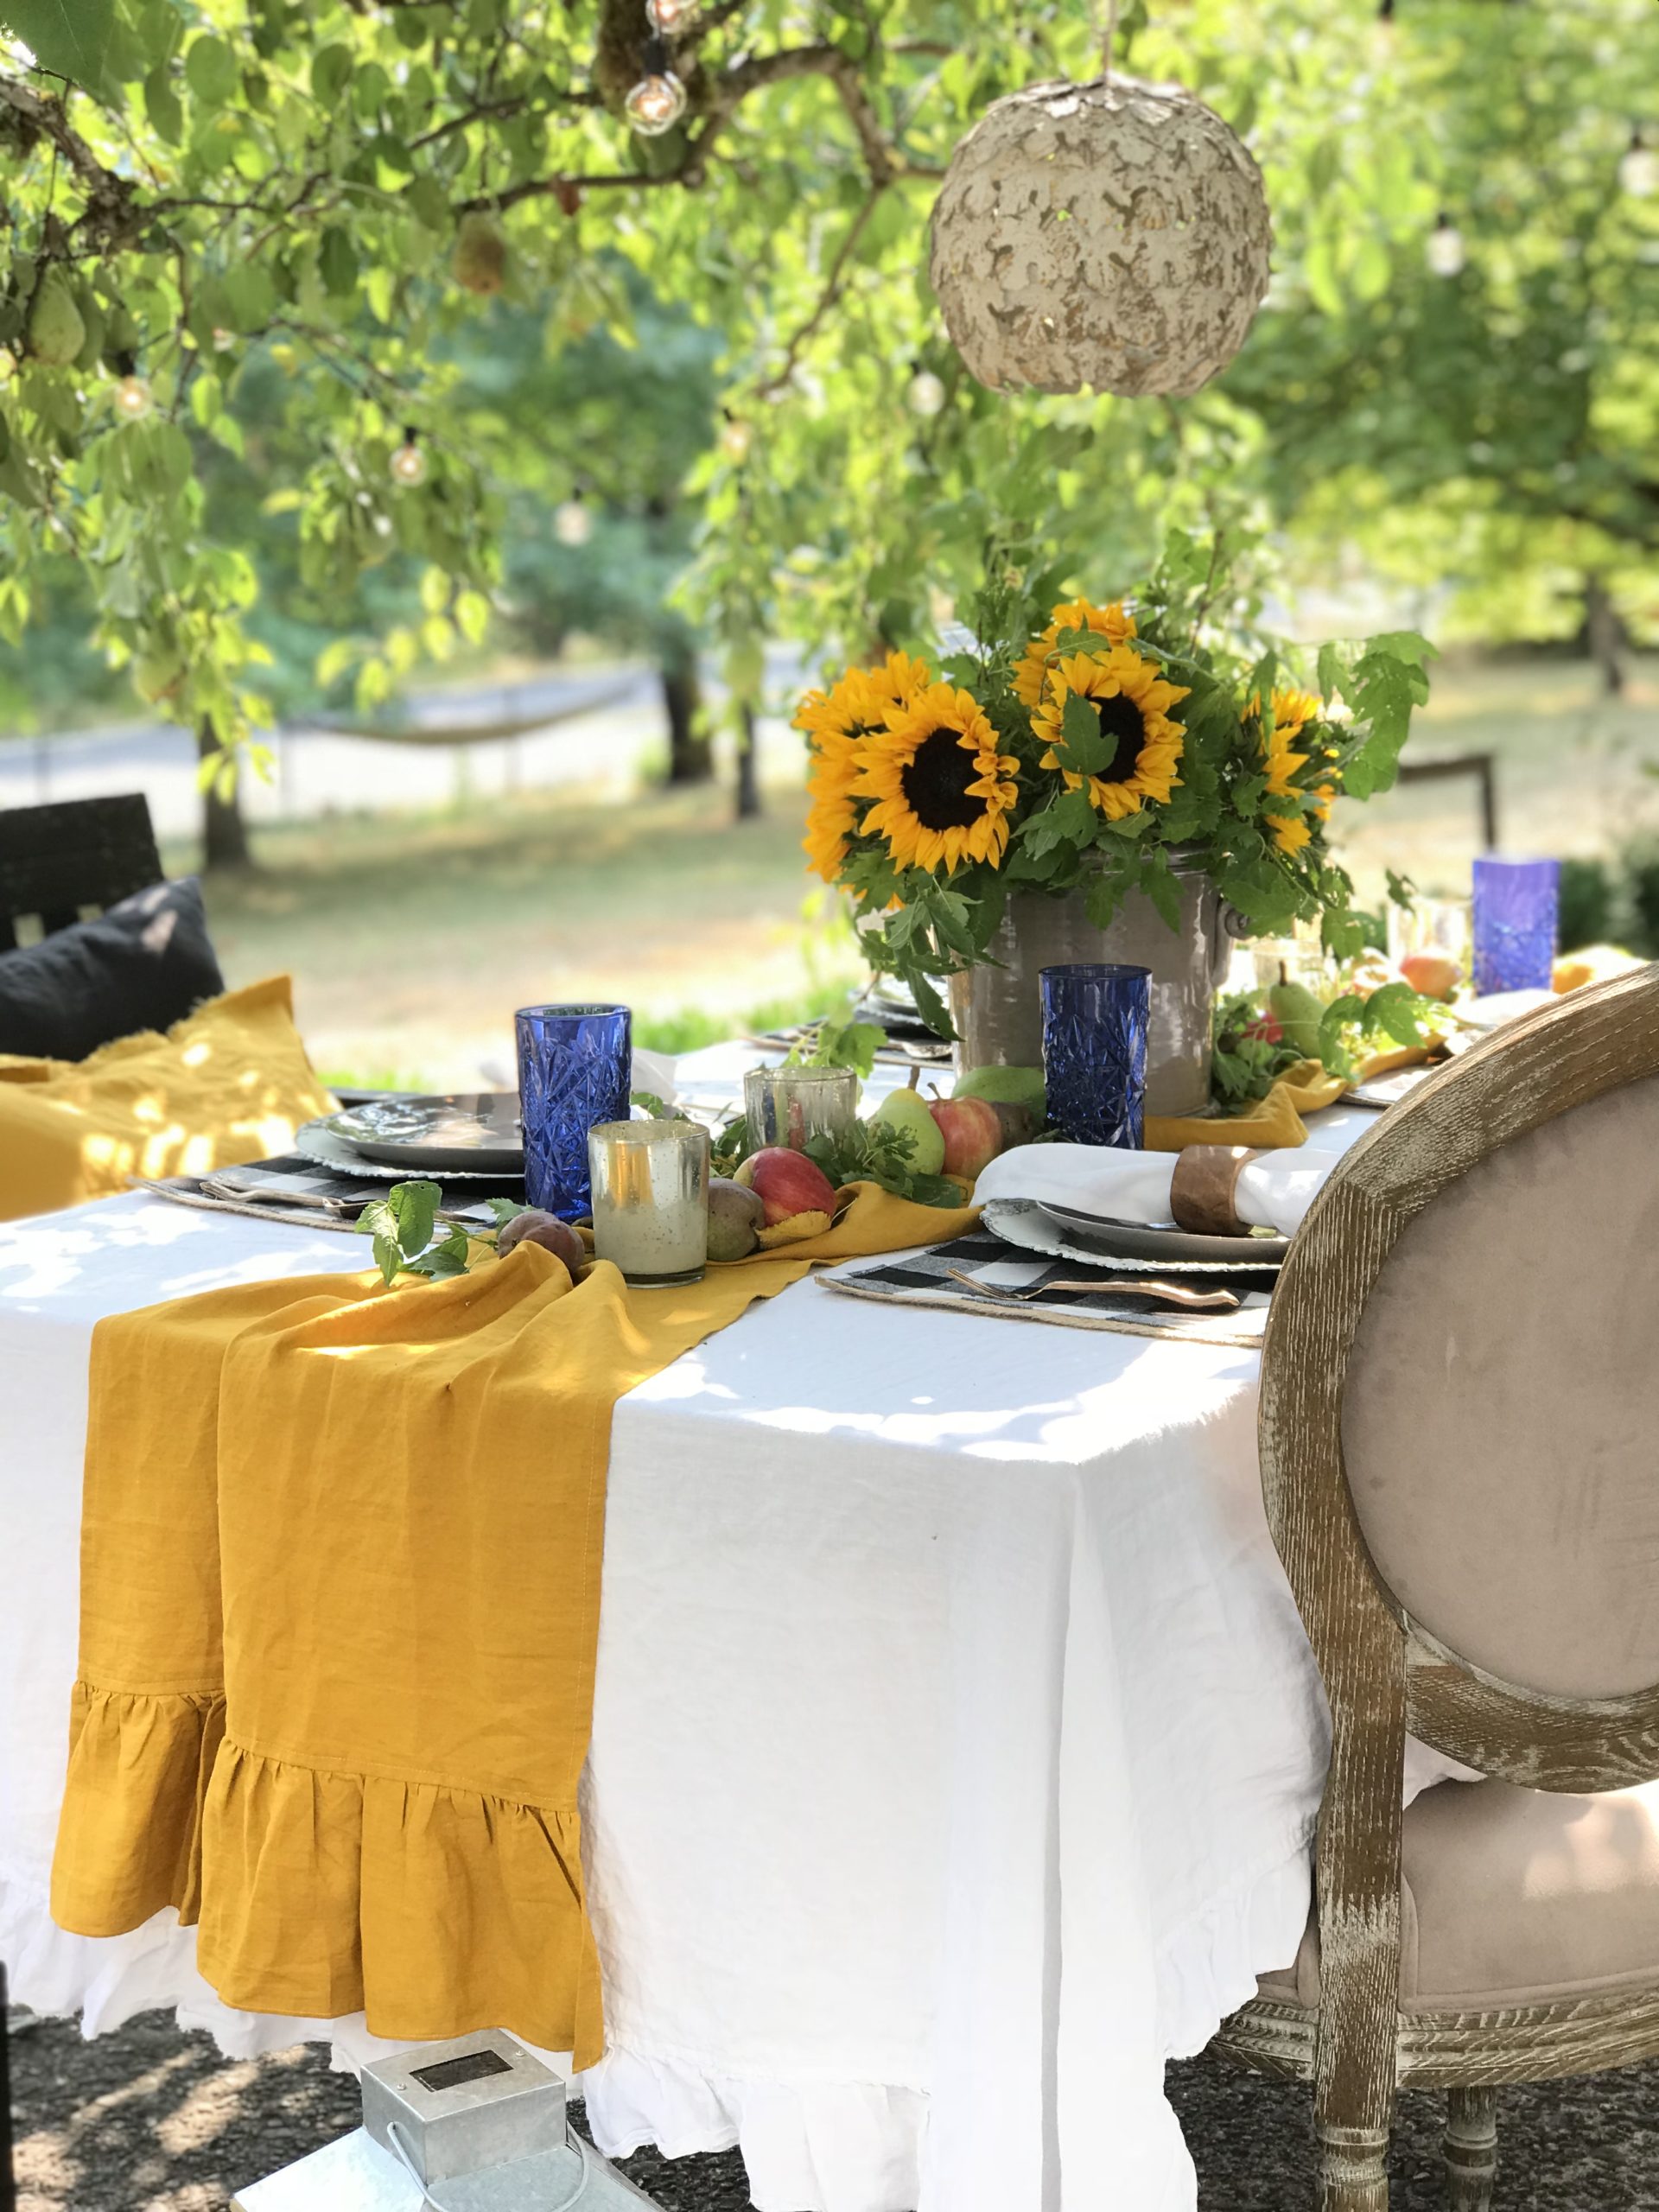 How to Decorate Your Fall Table in the Garden